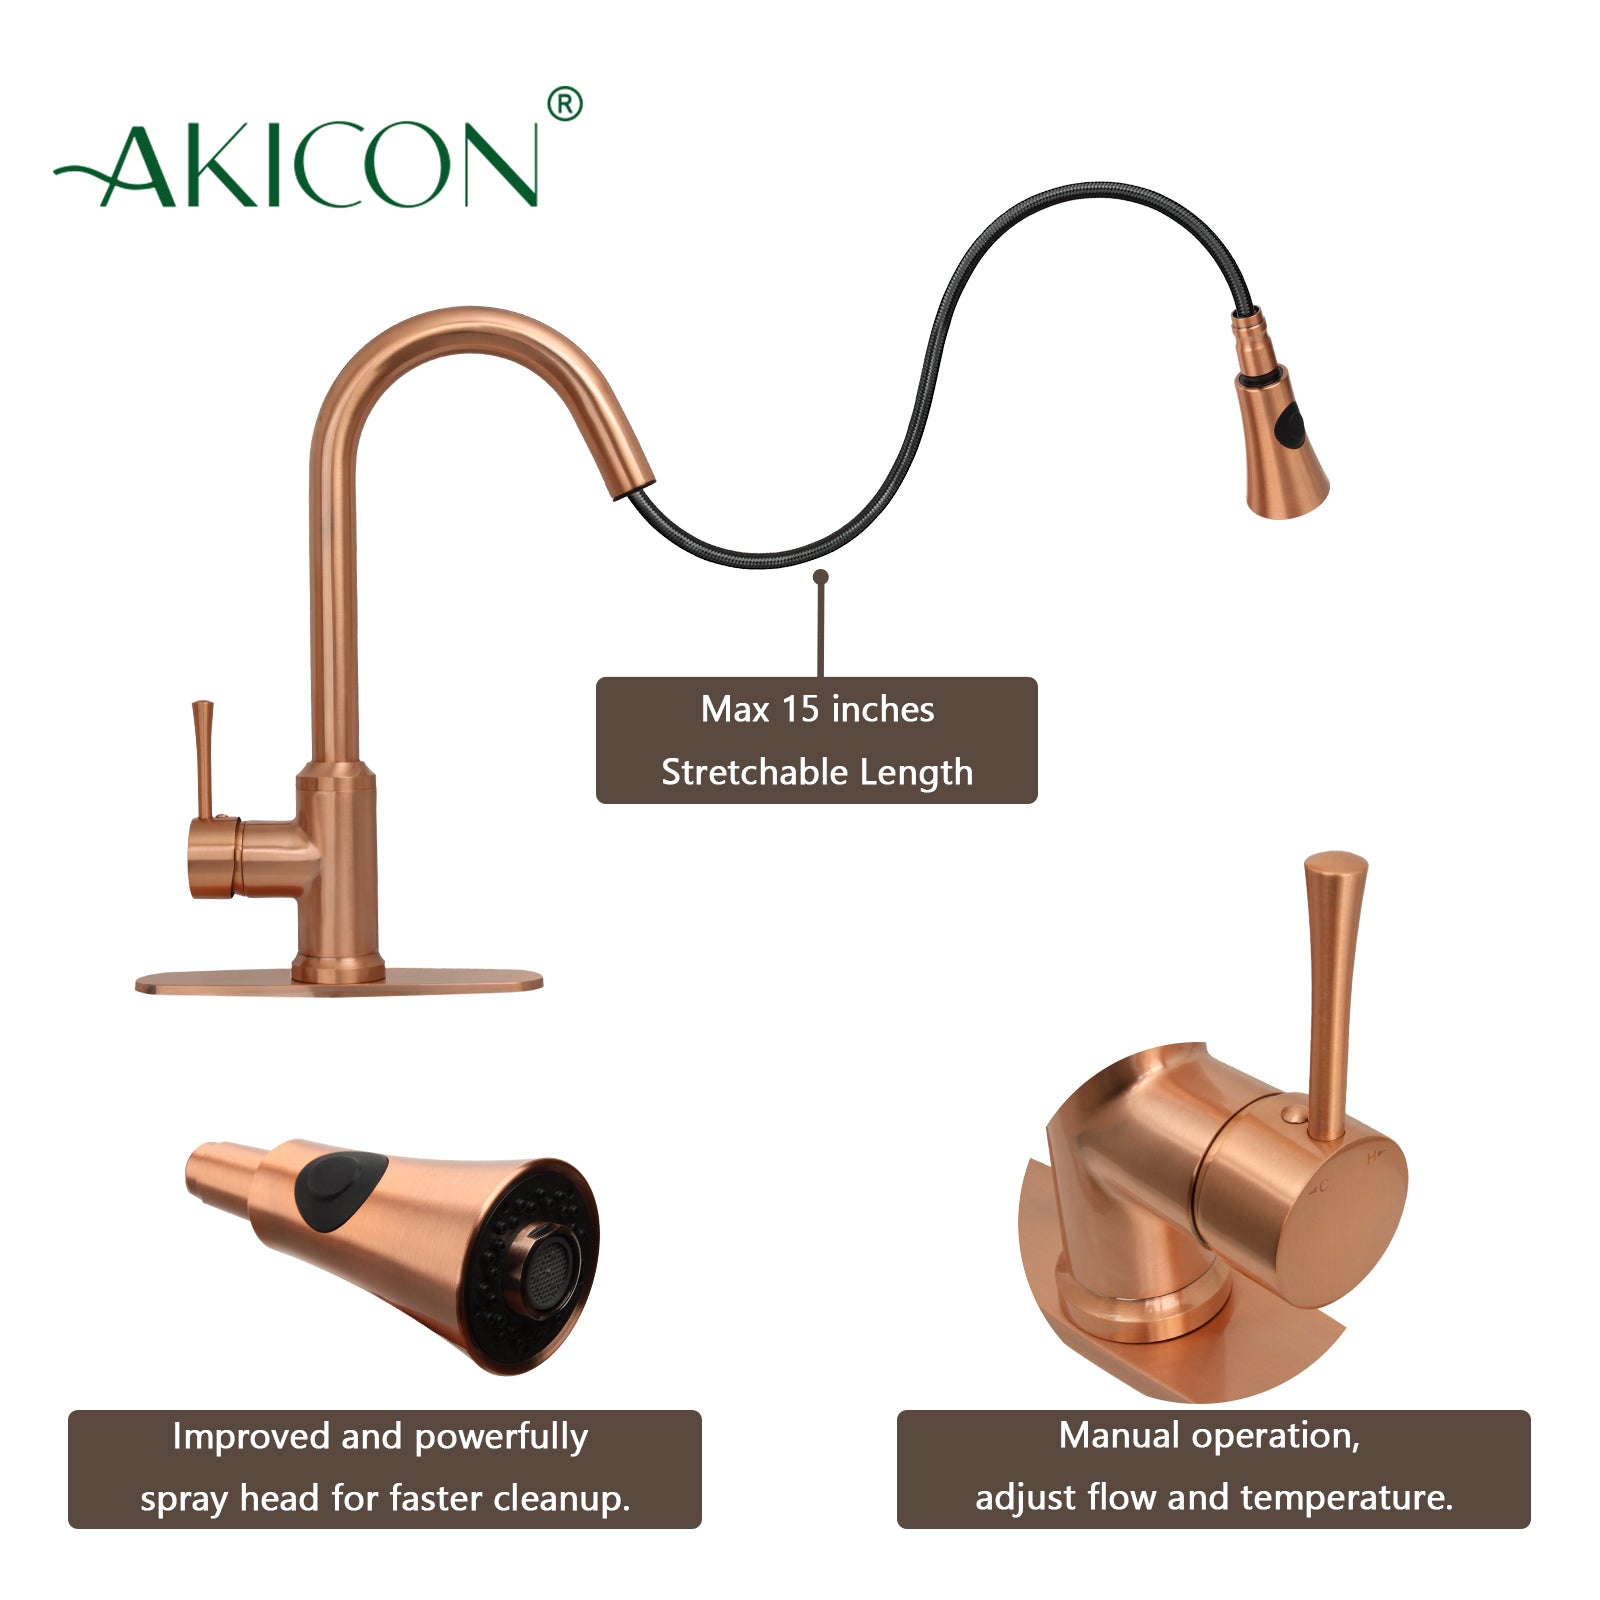 Copper Pull Out Kitchen Faucet with Deck Plate, Single Level Solid Brass Kitchen Sink Faucets with Pull Down Sprayer-AK96466C